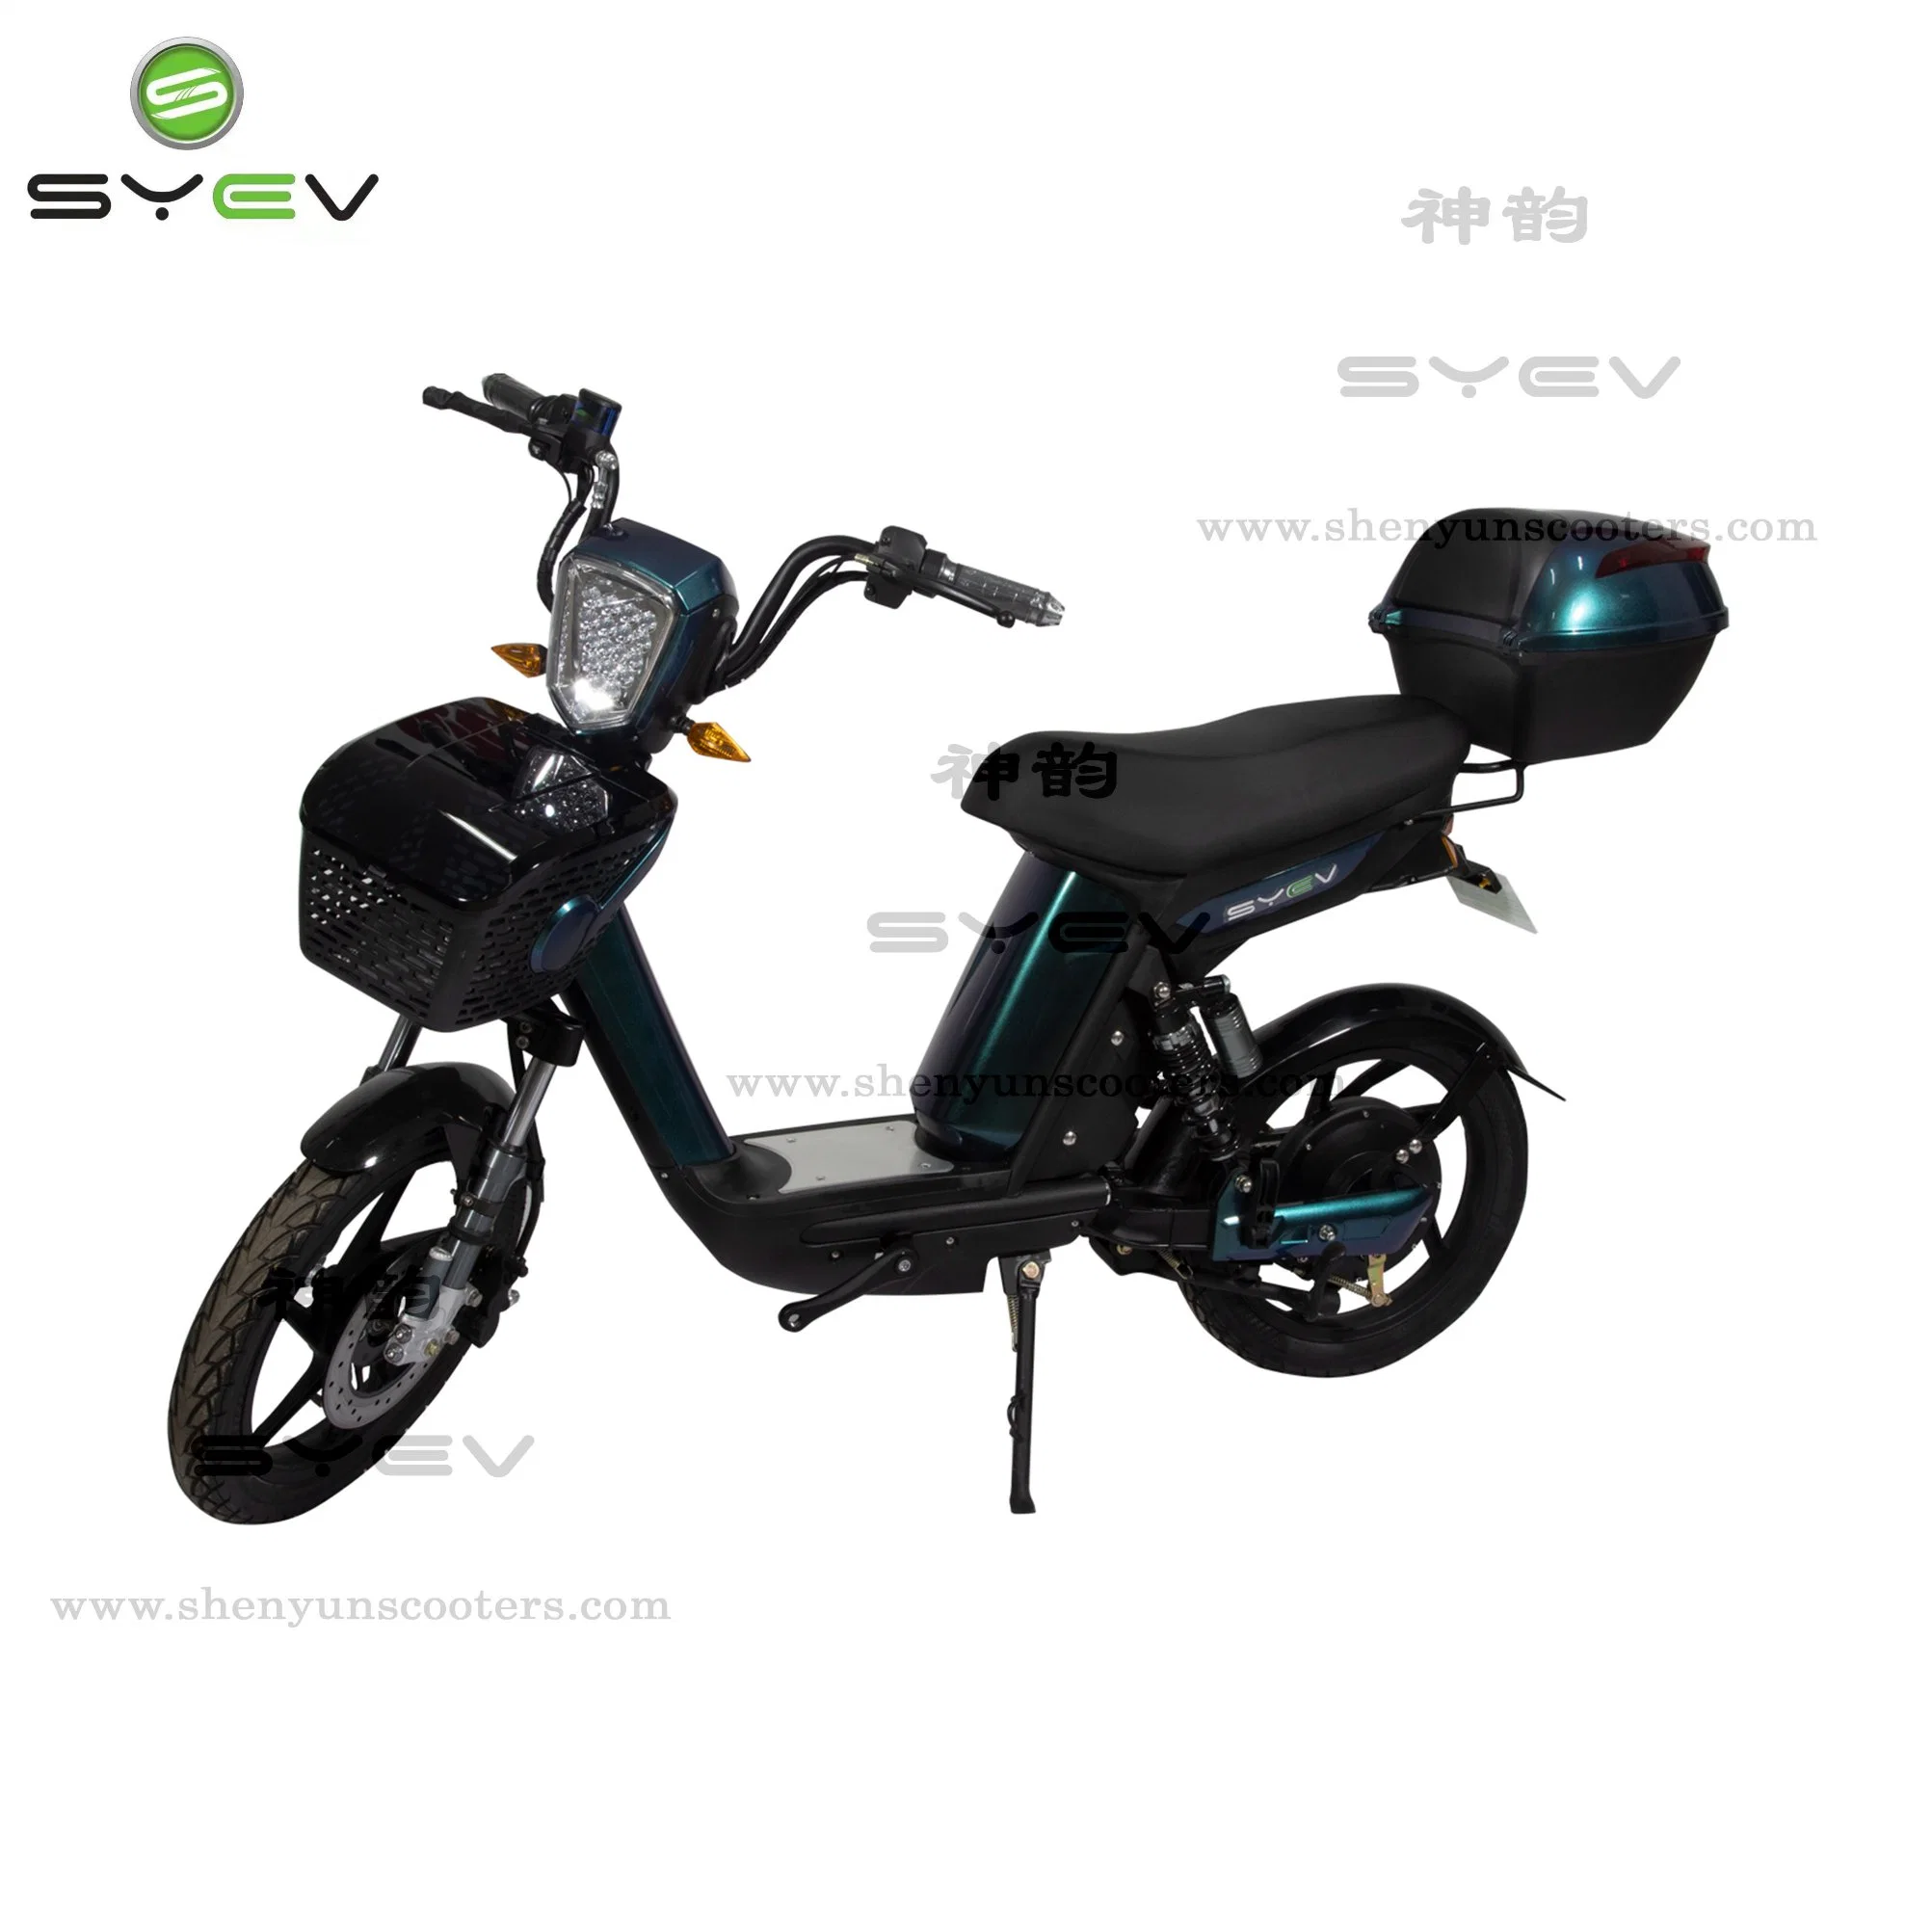 Syev Hot Selling Electric Bike with 48V / 12ah, Speed 35km / H Range 30-40km, Electric Scooter CE Certificate